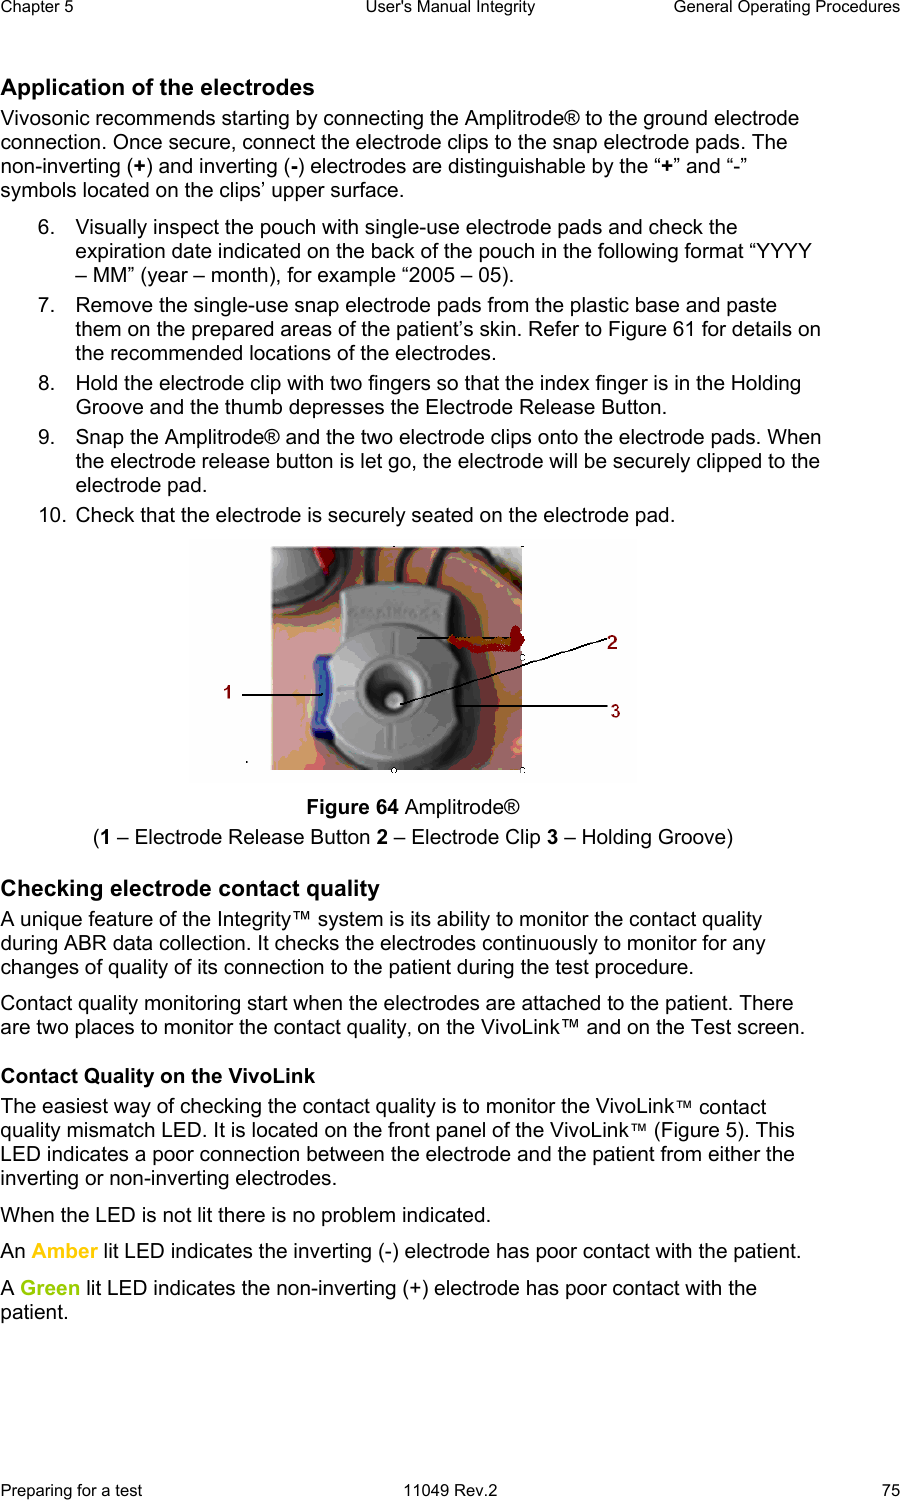 Chapter 5  User&apos;s Manual Integrity  General Operating Procedures Preparing for a test  11049 Rev.2  75 Application of the electrodes Vivosonic recommends starting by connecting the Amplitrode® to the ground electrode connection. Once secure, connect the electrode clips to the snap electrode pads. The non-inverting (+) and inverting (-) electrodes are distinguishable by the “+” and “-” symbols located on the clips’ upper surface.  6.  Visually inspect the pouch with single-use electrode pads and check the expiration date indicated on the back of the pouch in the following format “YYYY – MM” (year – month), for example “2005 – 05). 7.  Remove the single-use snap electrode pads from the plastic base and paste them on the prepared areas of the patient’s skin. Refer to Figure 61 for details on the recommended locations of the electrodes. 8.  Hold the electrode clip with two fingers so that the index finger is in the Holding Groove and the thumb depresses the Electrode Release Button.  9.  Snap the Amplitrode® and the two electrode clips onto the electrode pads. When the electrode release button is let go, the electrode will be securely clipped to the electrode pad. 10.  Check that the electrode is securely seated on the electrode pad.  Figure 64 Amplitrode®  (1 – Electrode Release Button 2 – Electrode Clip 3 – Holding Groove) Checking electrode contact quality  A unique feature of the Integrity™ system is its ability to monitor the contact quality during ABR data collection. It checks the electrodes continuously to monitor for any changes of quality of its connection to the patient during the test procedure.  Contact quality monitoring start when the electrodes are attached to the patient. There are two places to monitor the contact quality, on the VivoLink™ and on the Test screen.  Contact Quality on the VivoLink The easiest way of checking the contact quality is to monitor the VivoLink™ contact quality mismatch LED. It is located on the front panel of the VivoLink™ (Figure 5). This LED indicates a poor connection between the electrode and the patient from either the inverting or non-inverting electrodes.  When the LED is not lit there is no problem indicated.  An Amber lit LED indicates the inverting (-) electrode has poor contact with the patient.  A Green lit LED indicates the non-inverting (+) electrode has poor contact with the patient. 